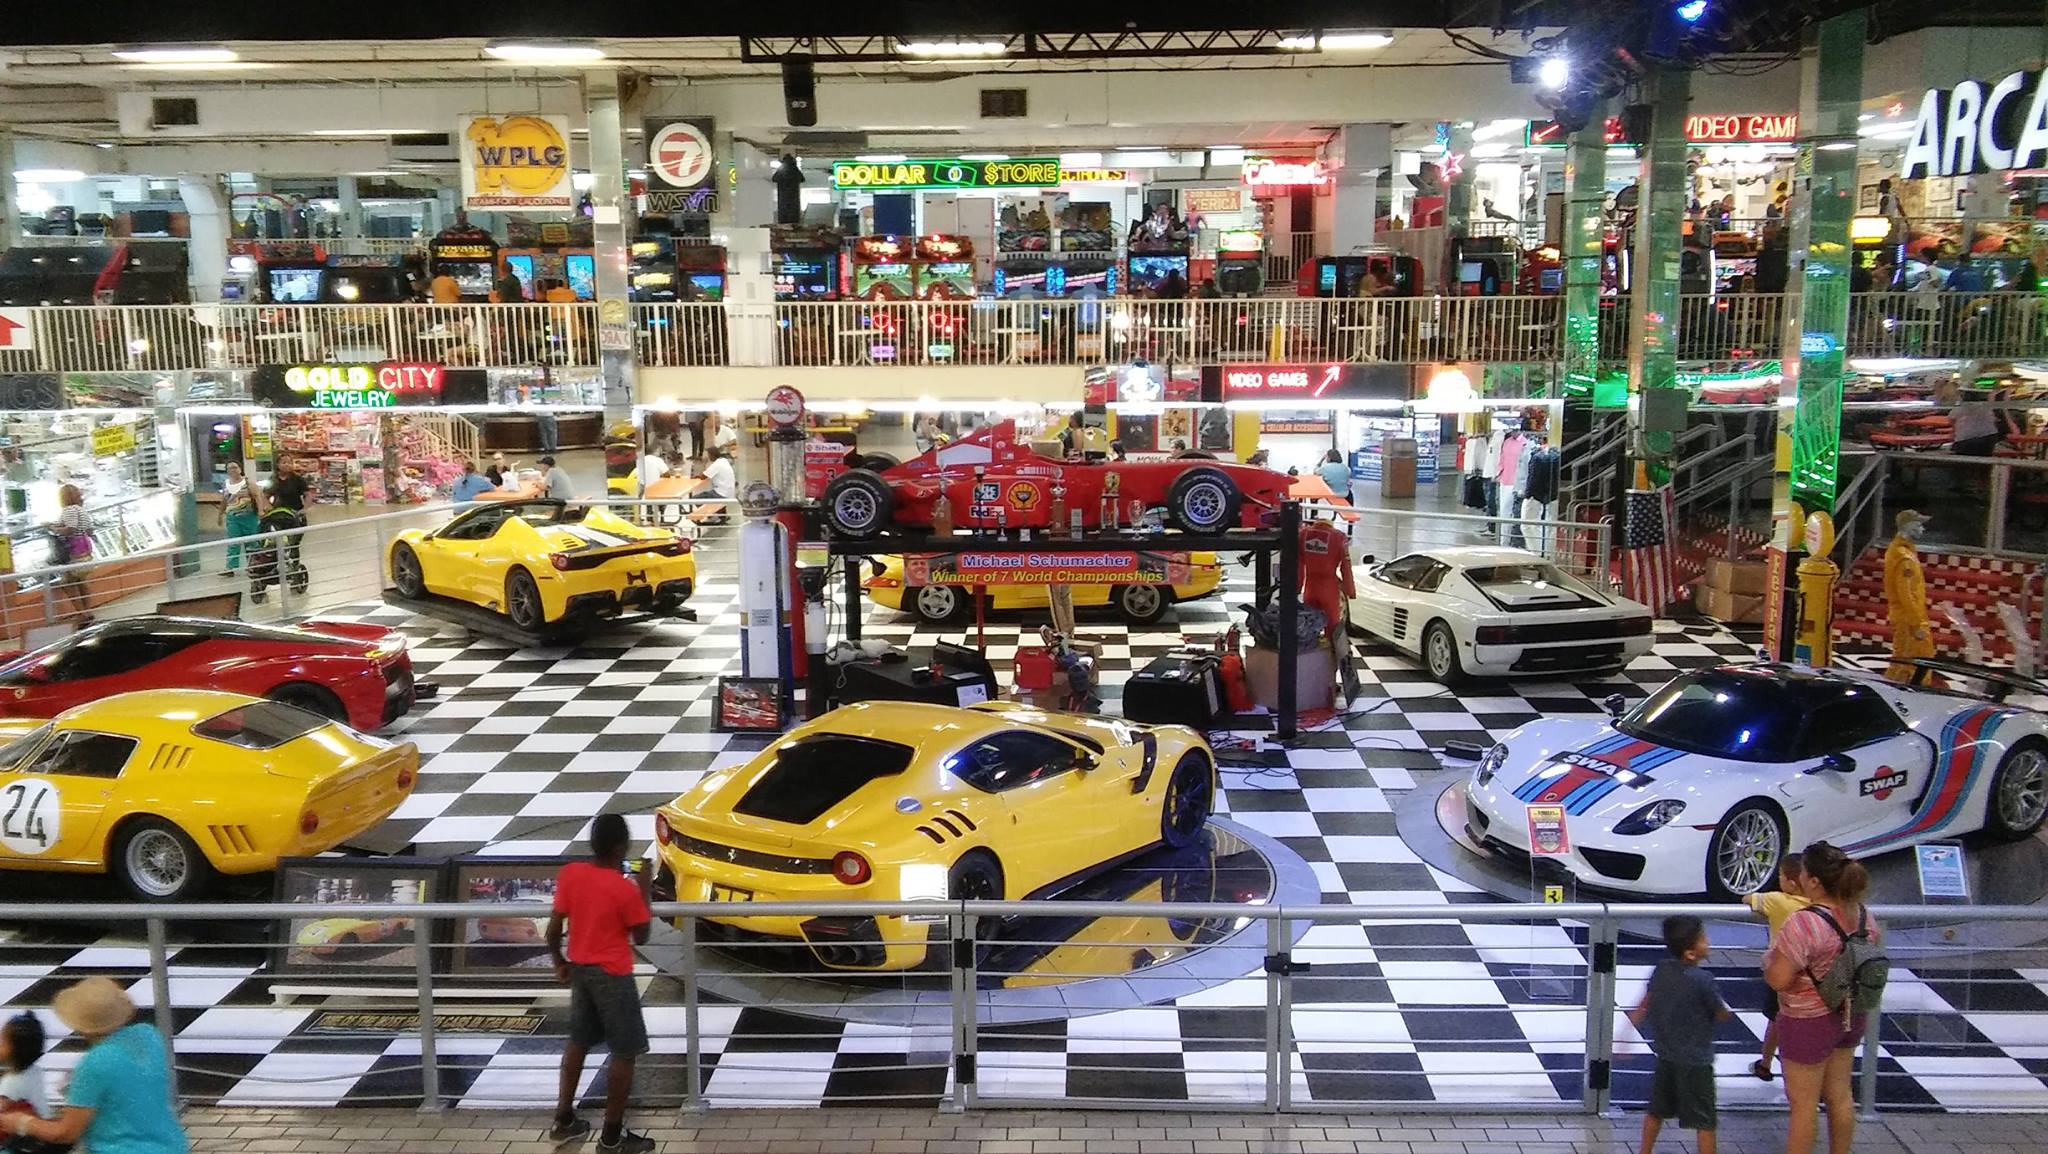 Exotic Car Collection the Hidden Gem of Fort Lauderdale Swap Shop | New Times Broward-Palm Beach